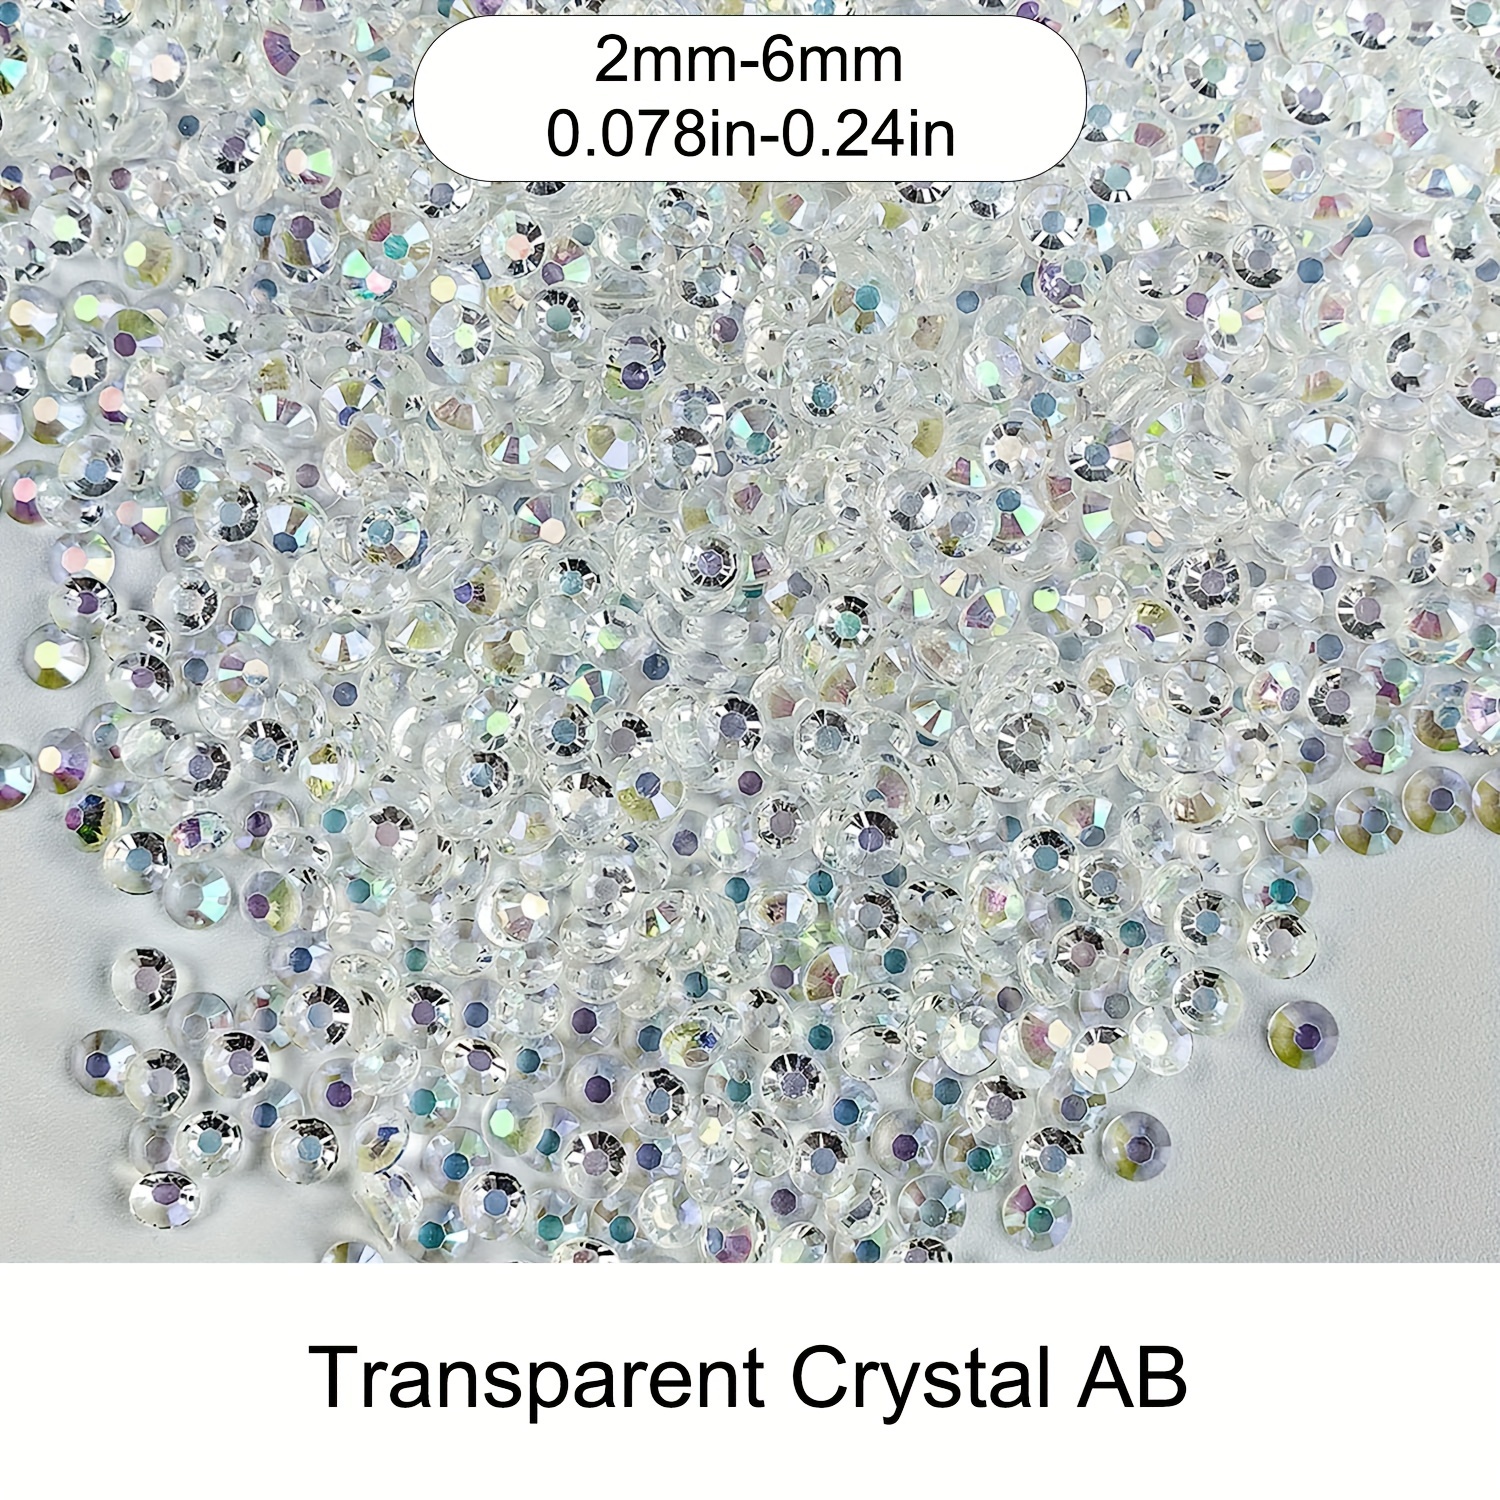 OPAQUE Jelly Flatback Resin Rhinestones NO AB Coating Choose Size and Color  2mm 3mm 4mm 5mm 6mm Faceted Bling Nonhotfix 